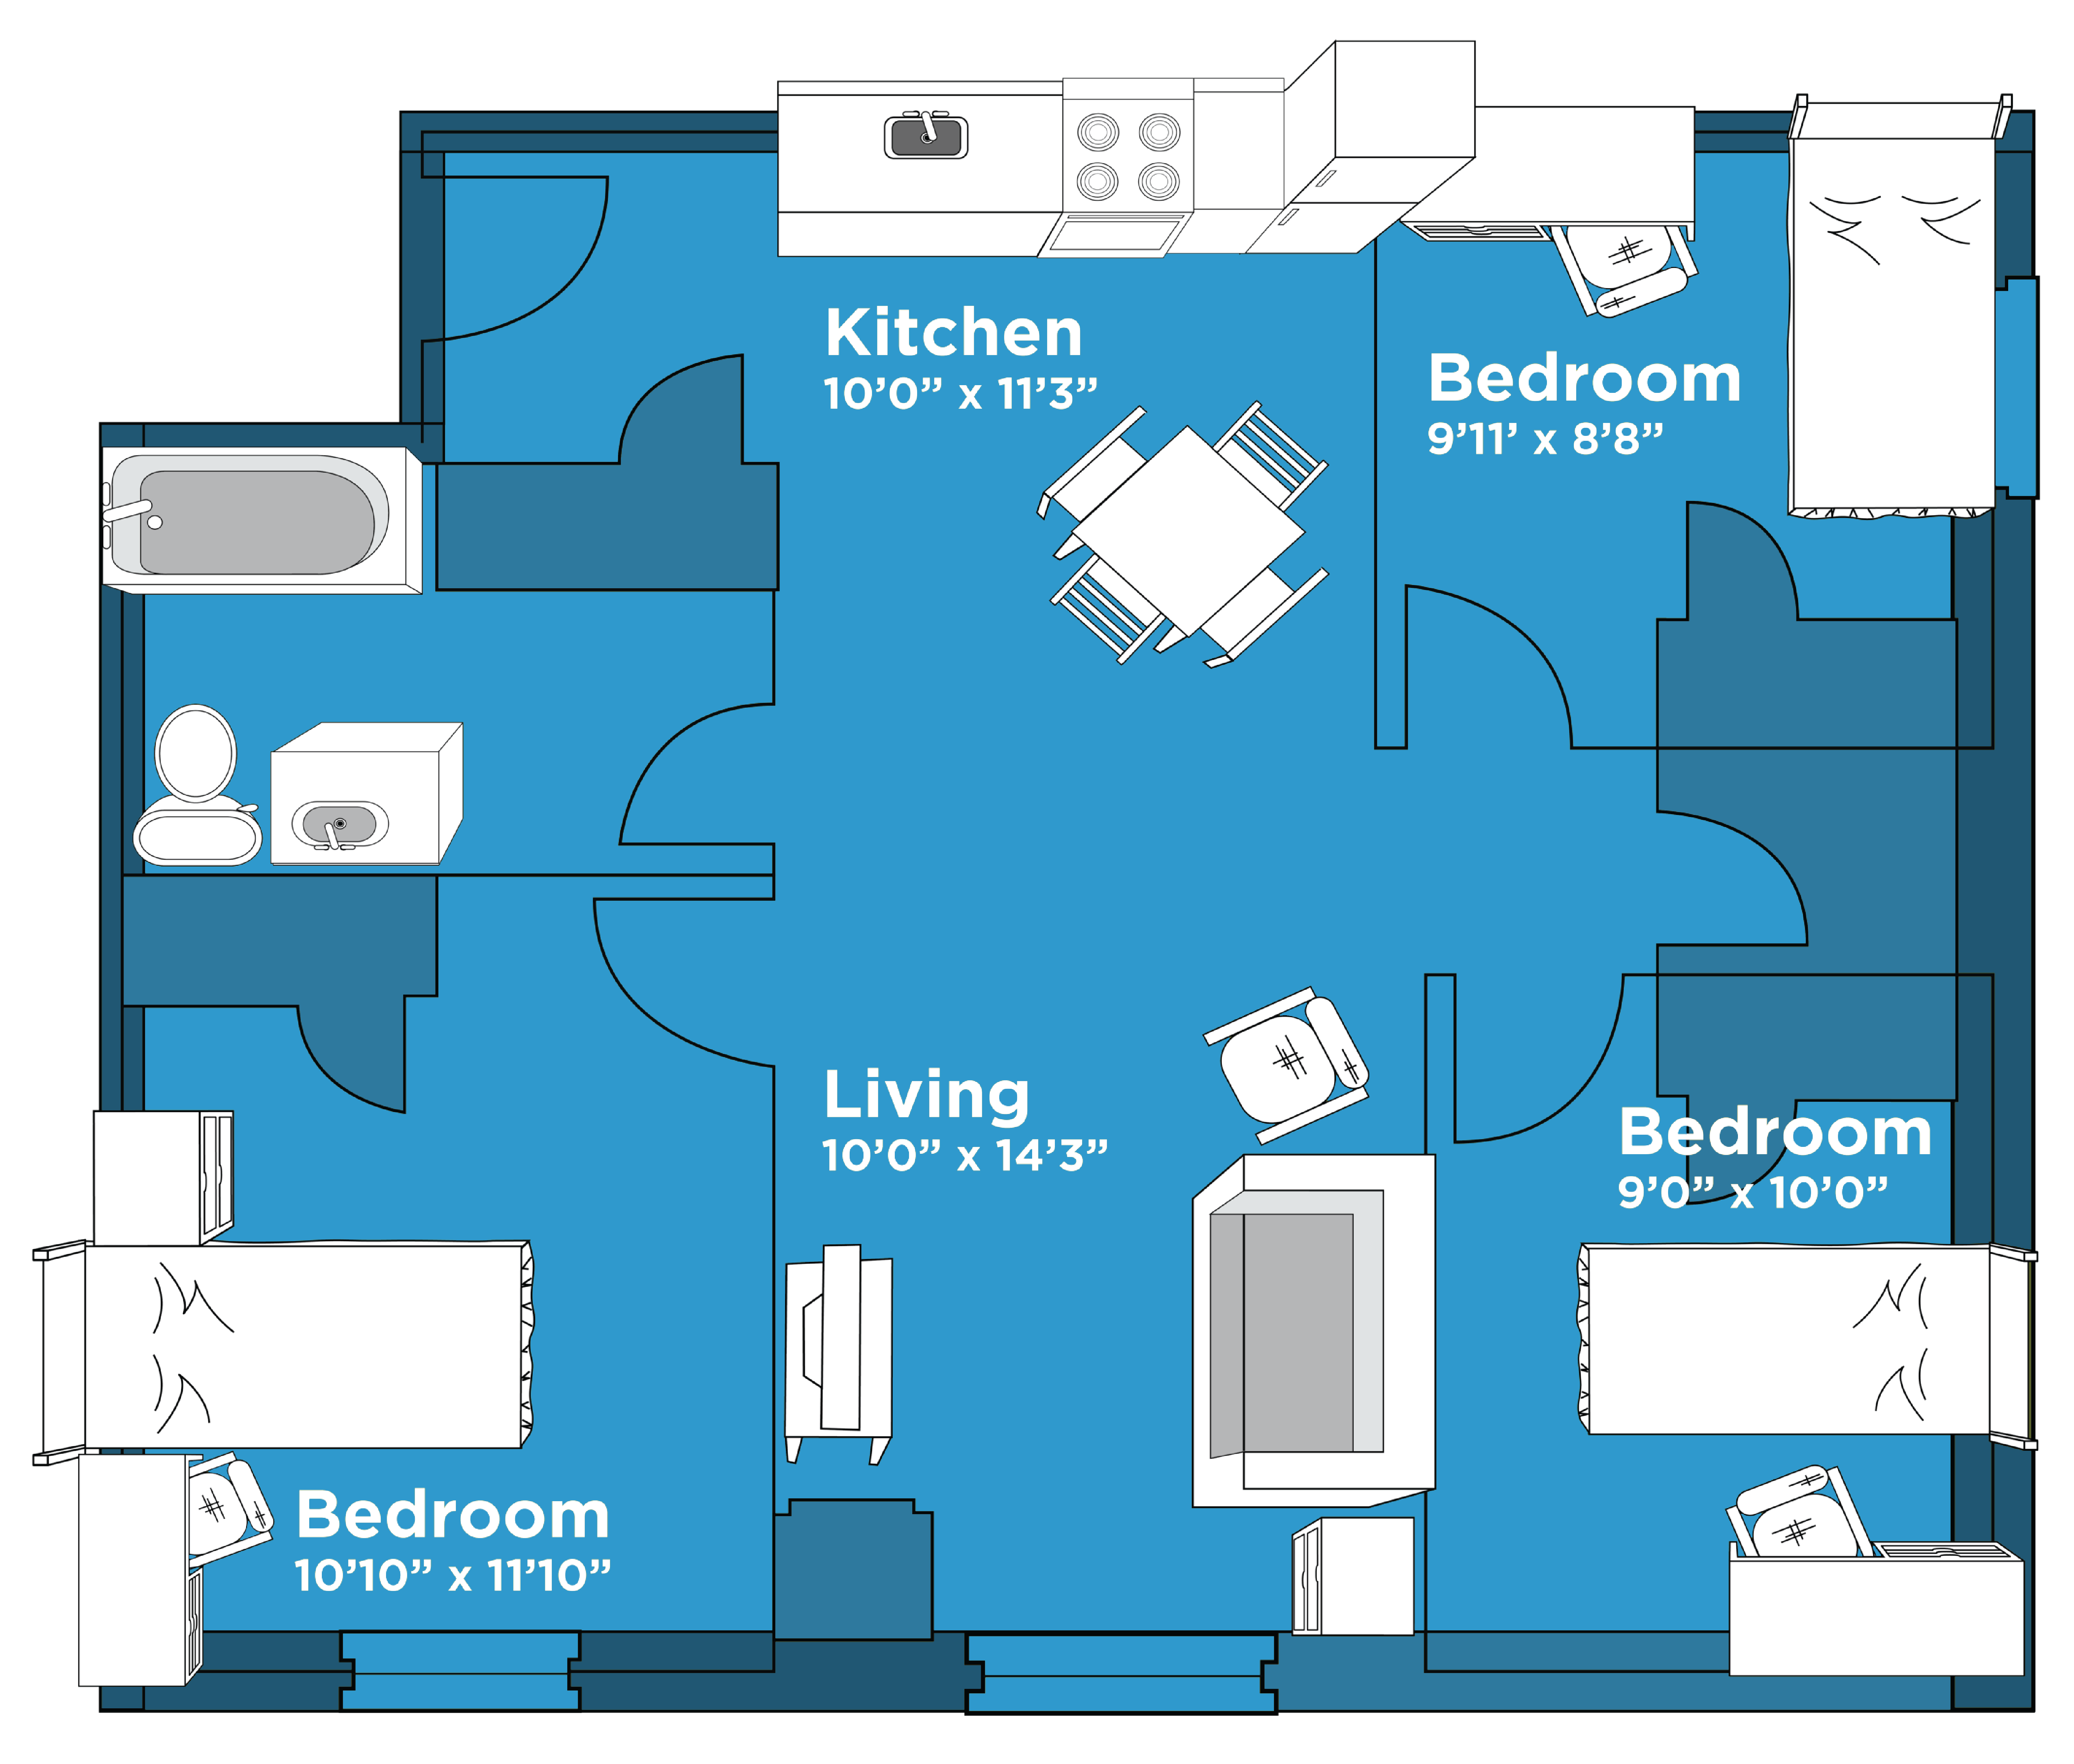 3 bedroom apartment layout